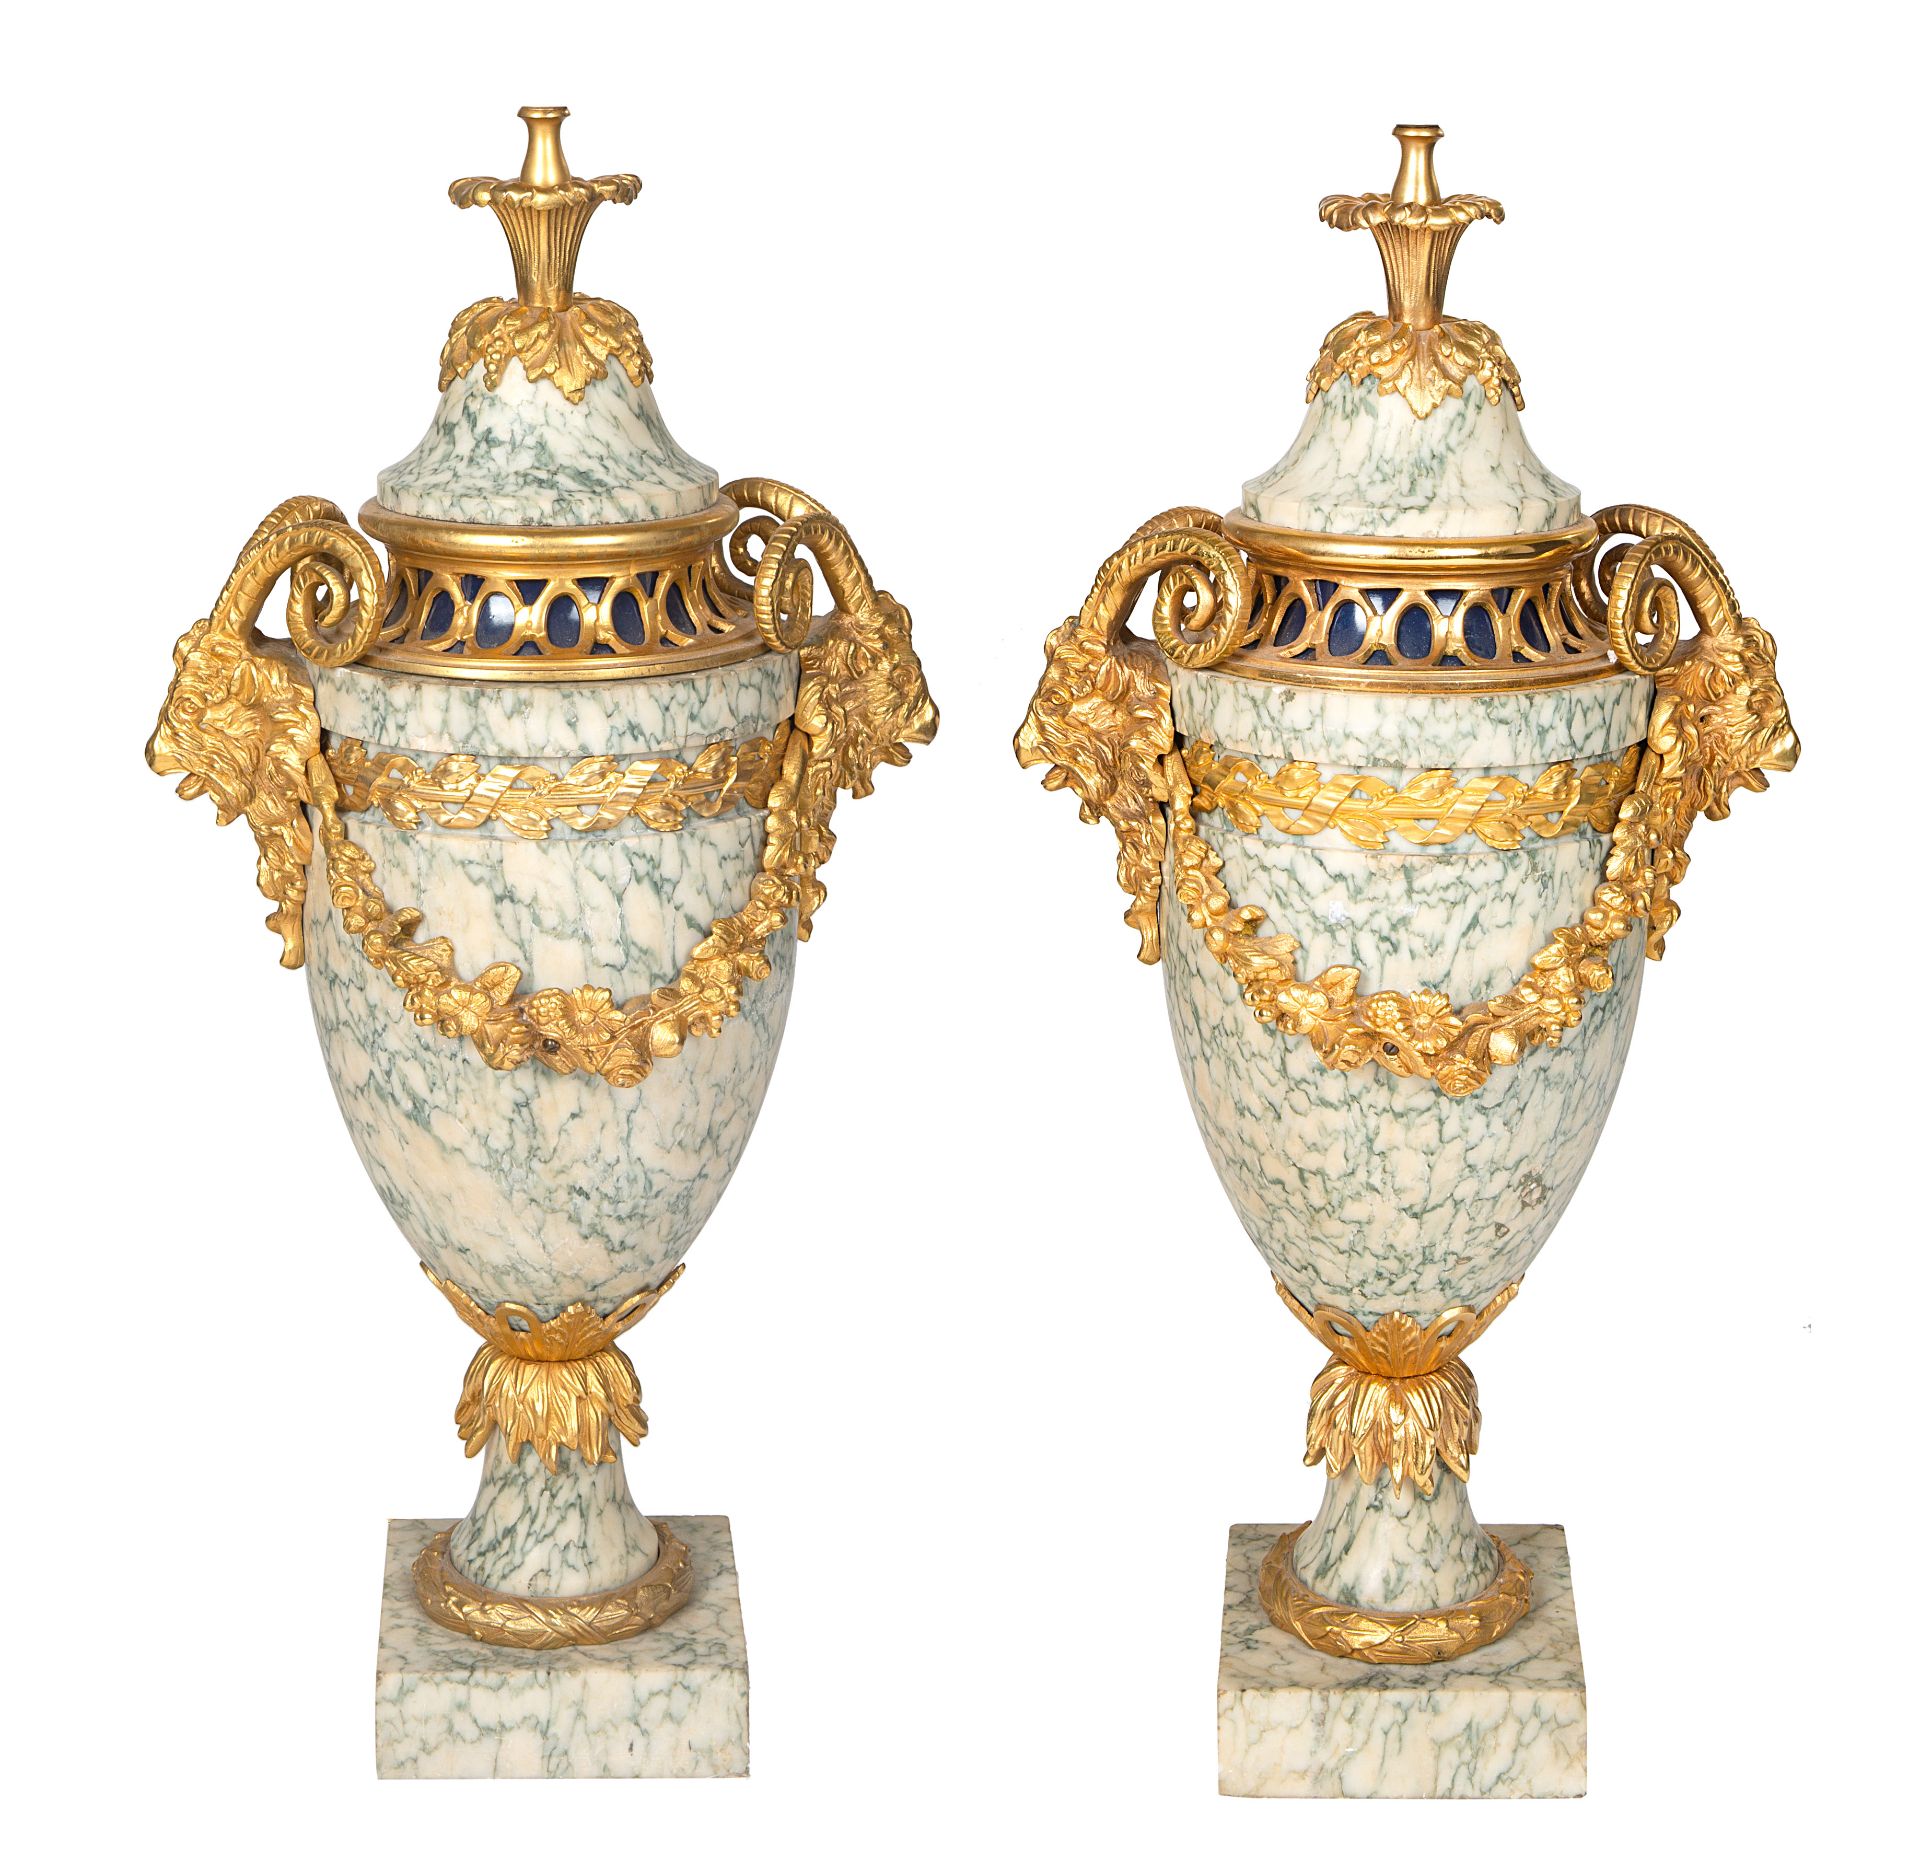 A PAIR OF FRENCH LOUIS XVI STYLE ORMOLU-MOUNTED MARBLE URNS, LATE 19TH CENTURY WITH LATER LAMP MOUNT